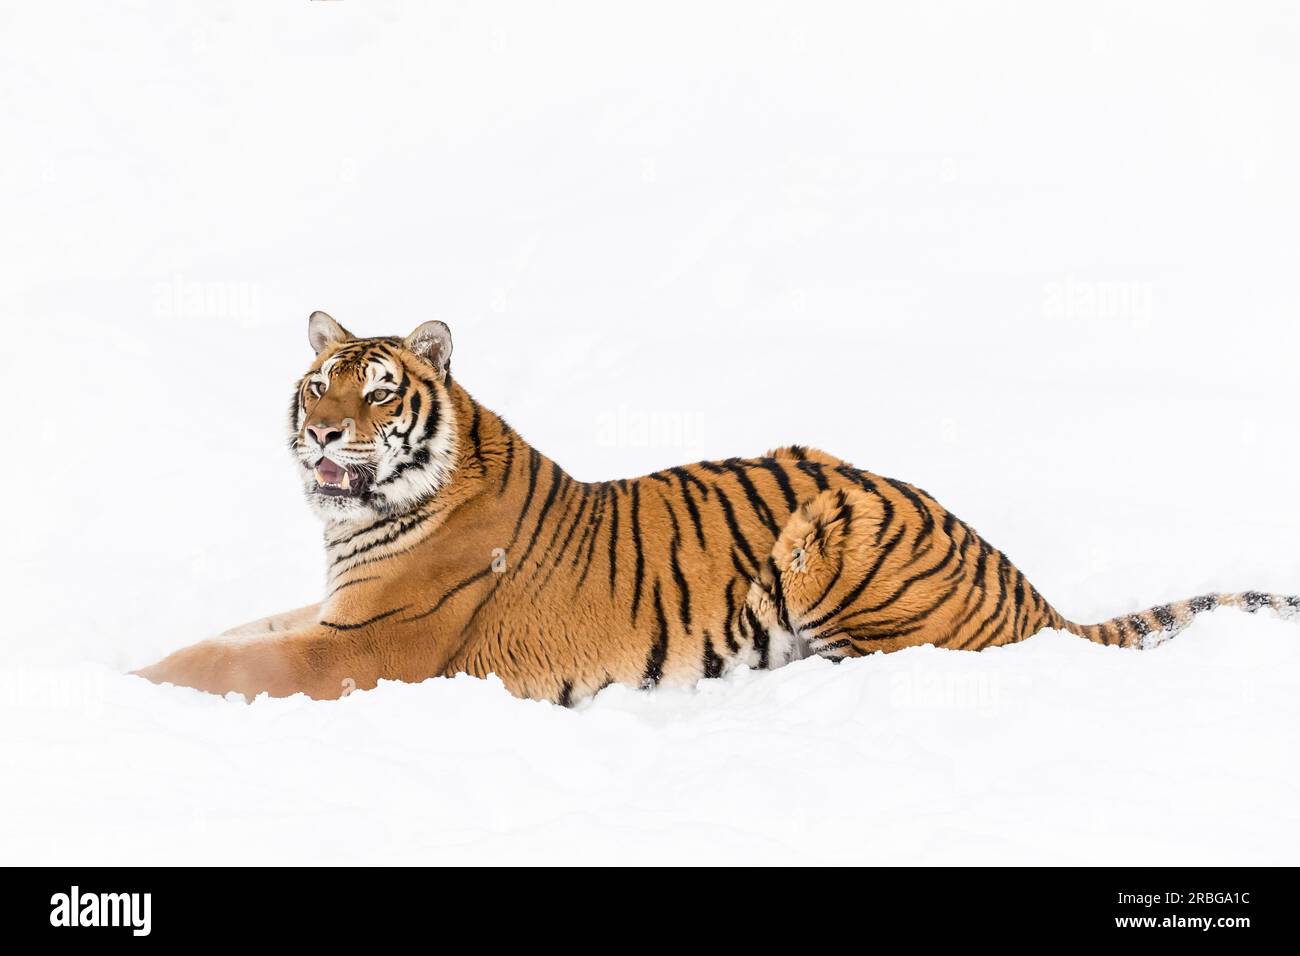 A Bengal Tiger in a snowy forest hunting for prey Stock Photo